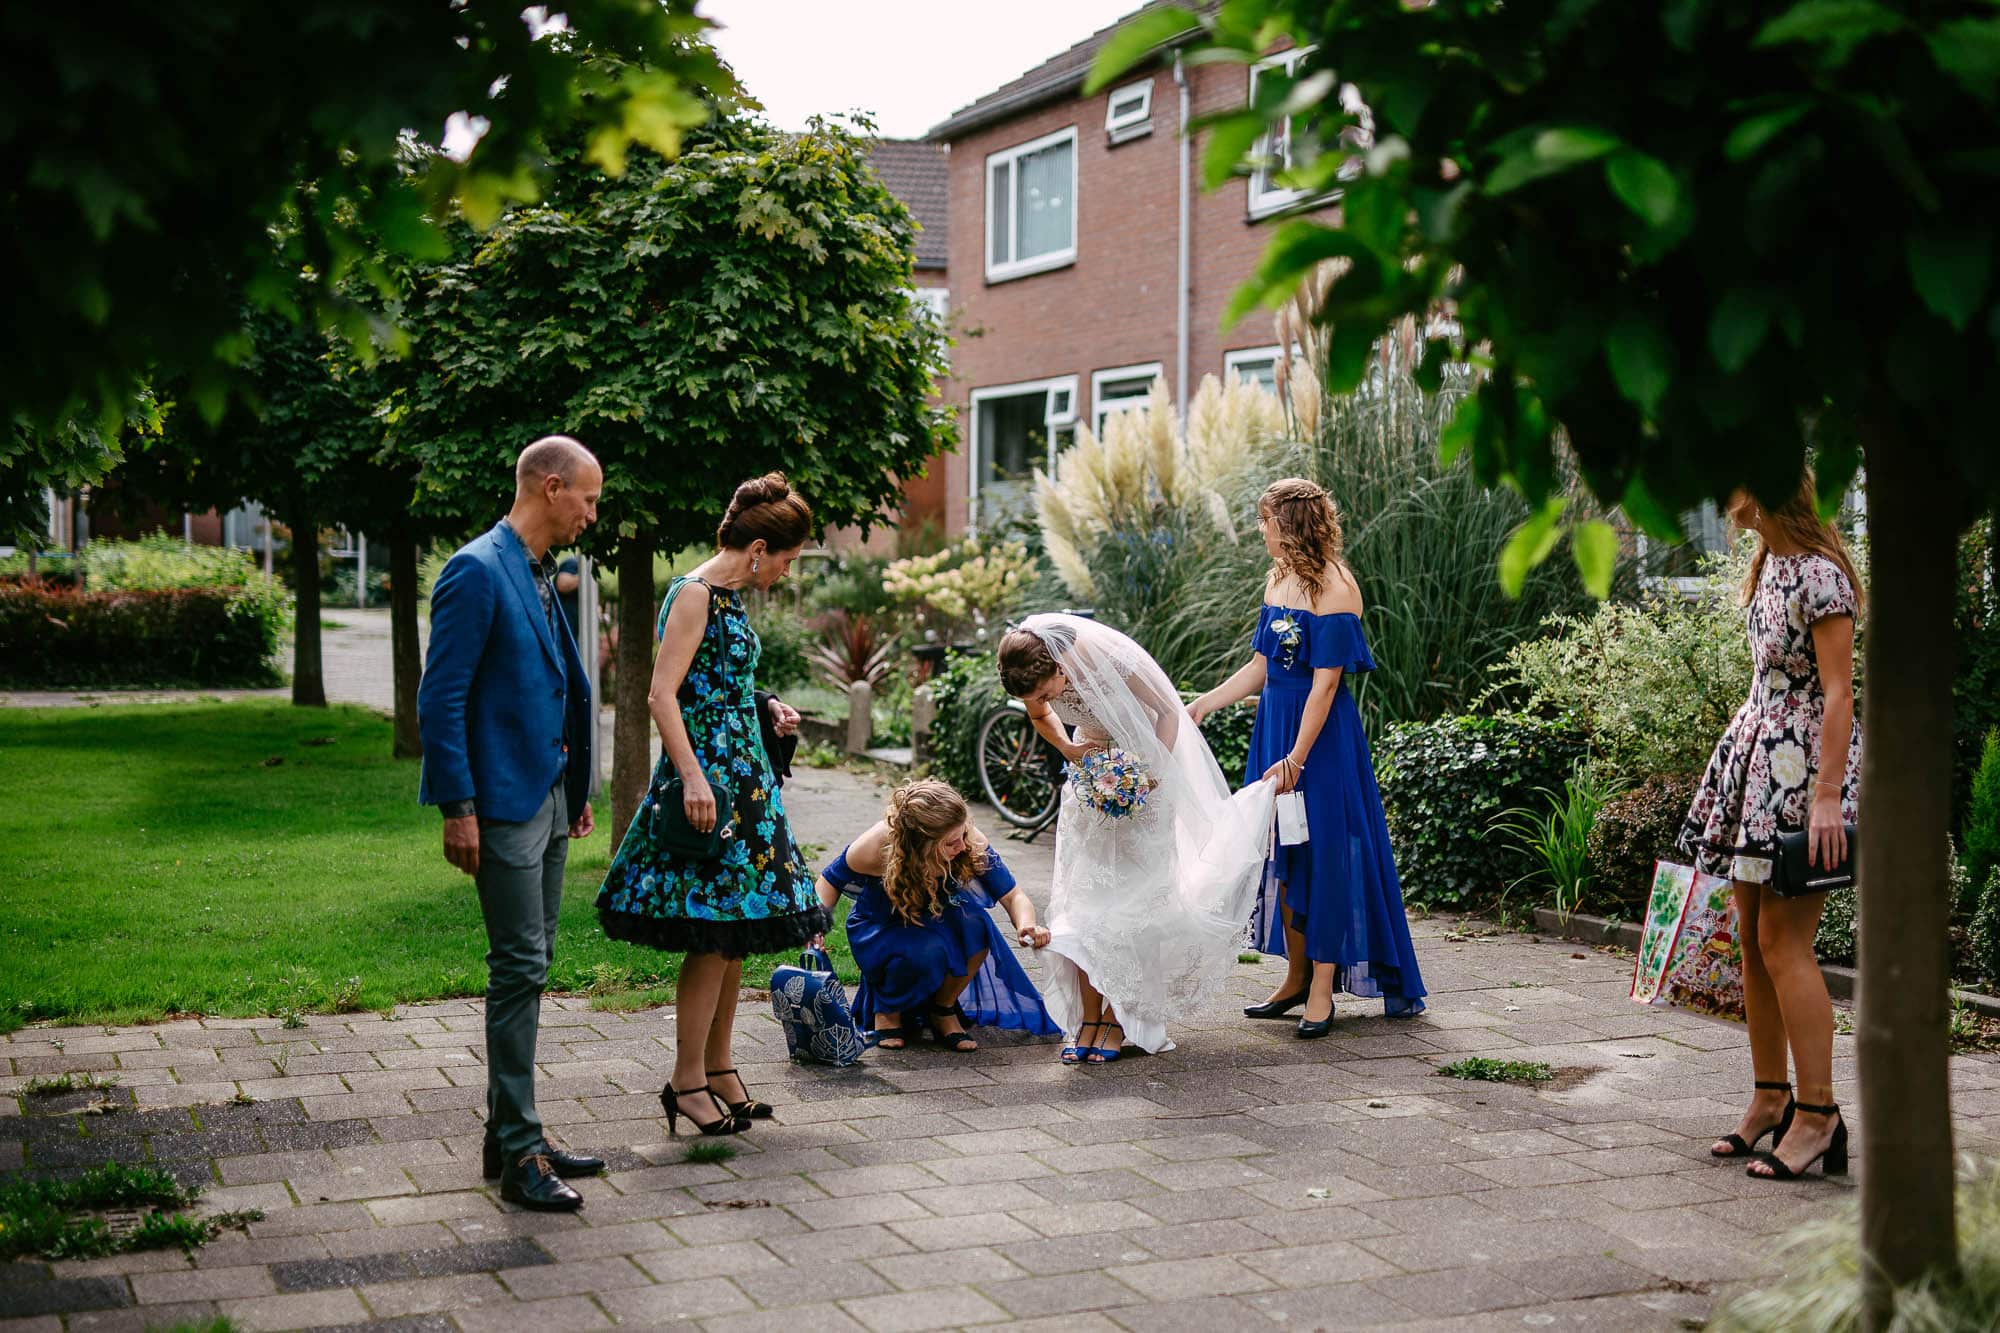 A bride and her bridesmaids prepare for their betrothal in a garden.